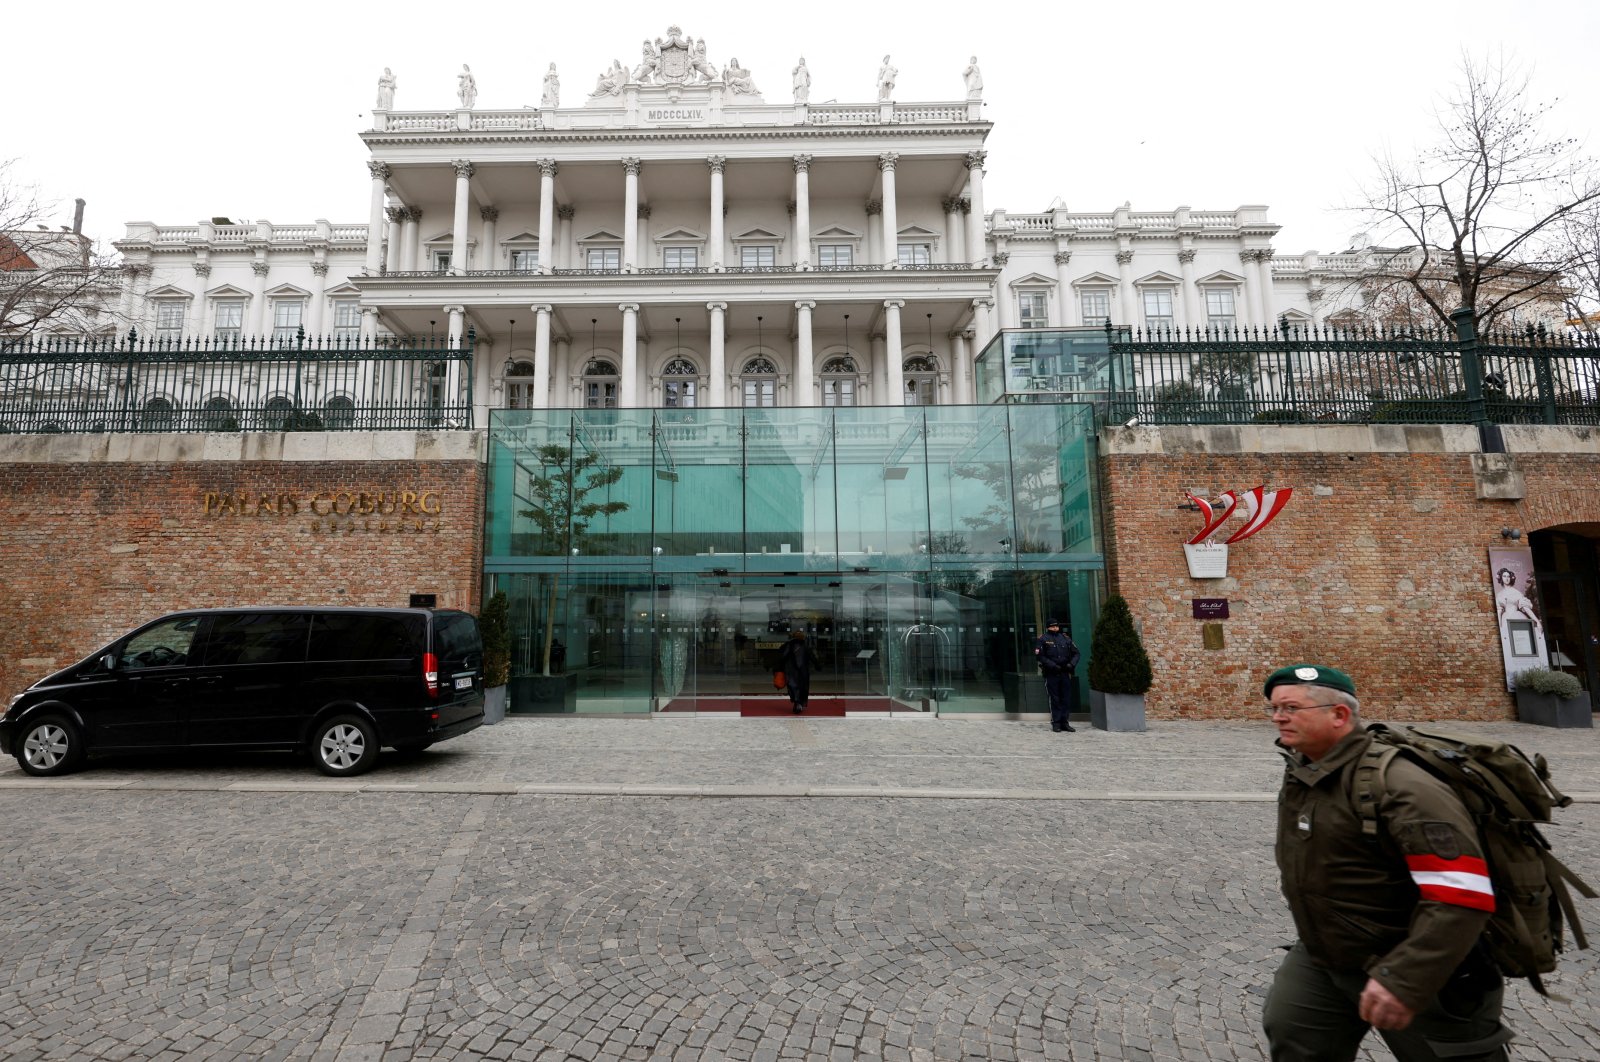 Palais Coburg, the site of a meeting of the Joint Comprehensive Plan of Action (JCPOA), in Vienna, Austria, Feb. 8, 2022. (Reuters Photo)